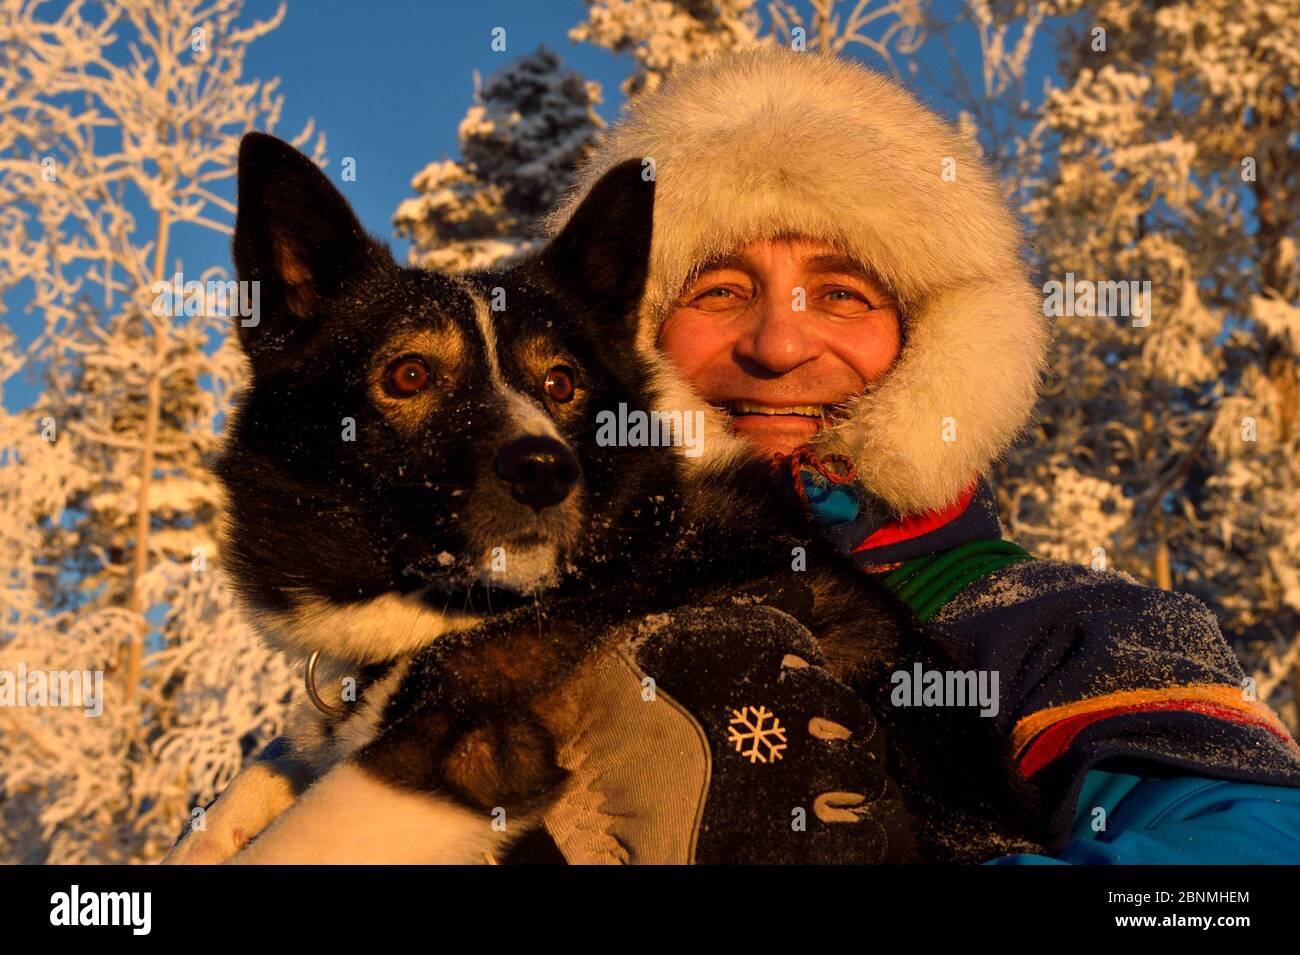 Nils-Torbjörn Nutti, owner and operator at Nutti Sami Siida, with domestic husky dog, during snowmobile trip into the wilderness, Jukkasjarvi, Lapland Stock Photo